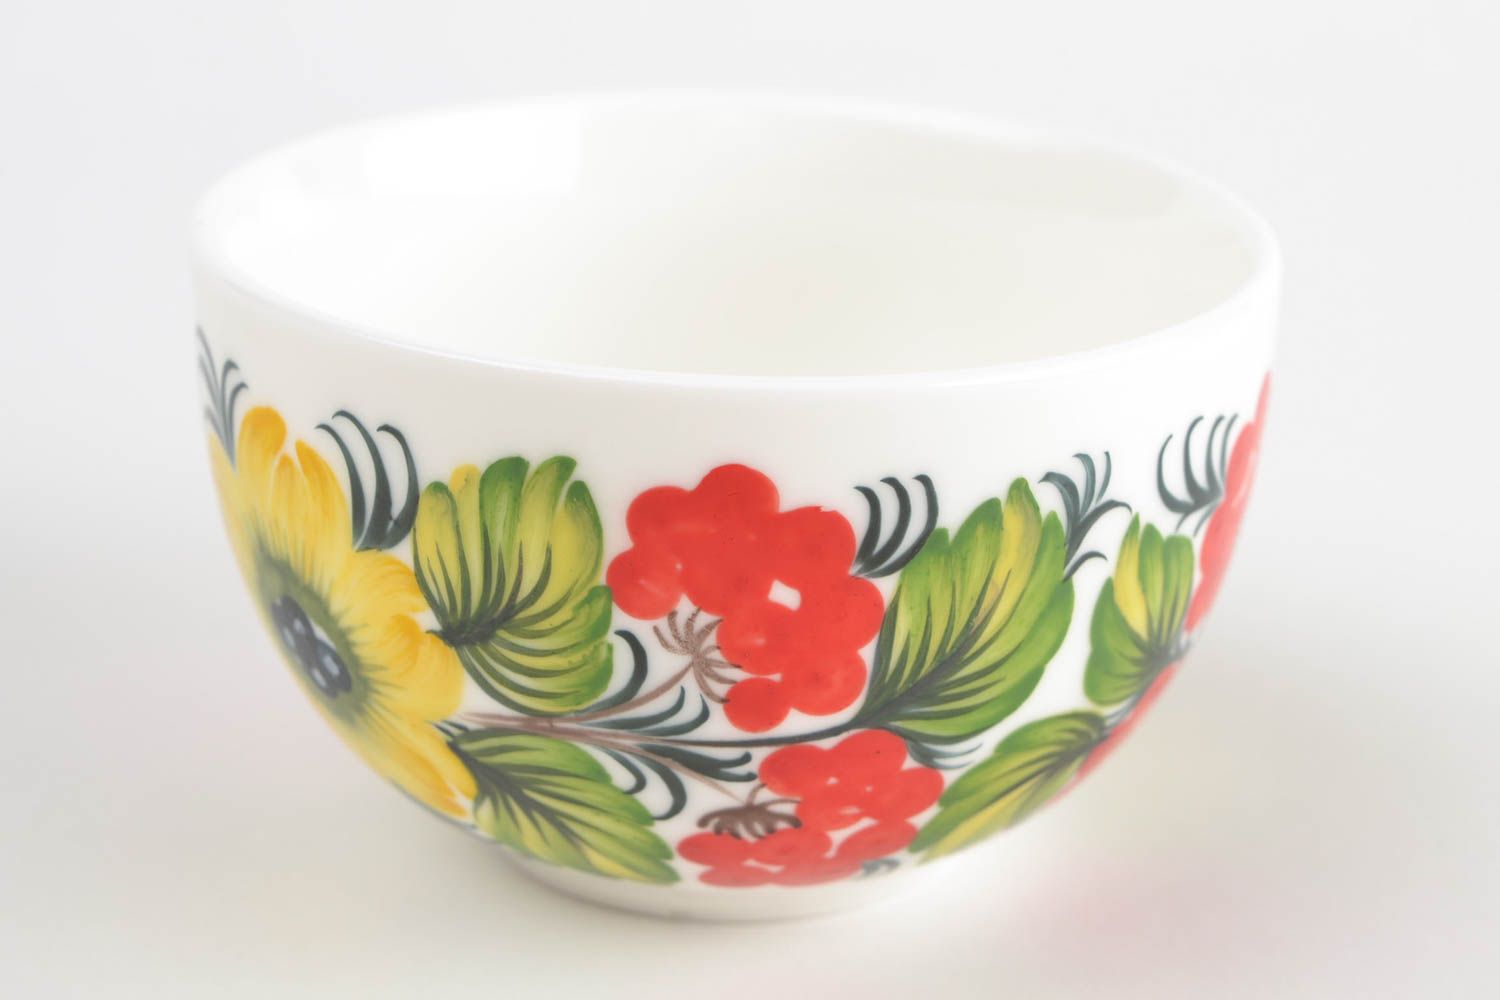 8,5 oz ceramic porcelain teacup with handle and floral design in Russian style 0,39 lb photo 5